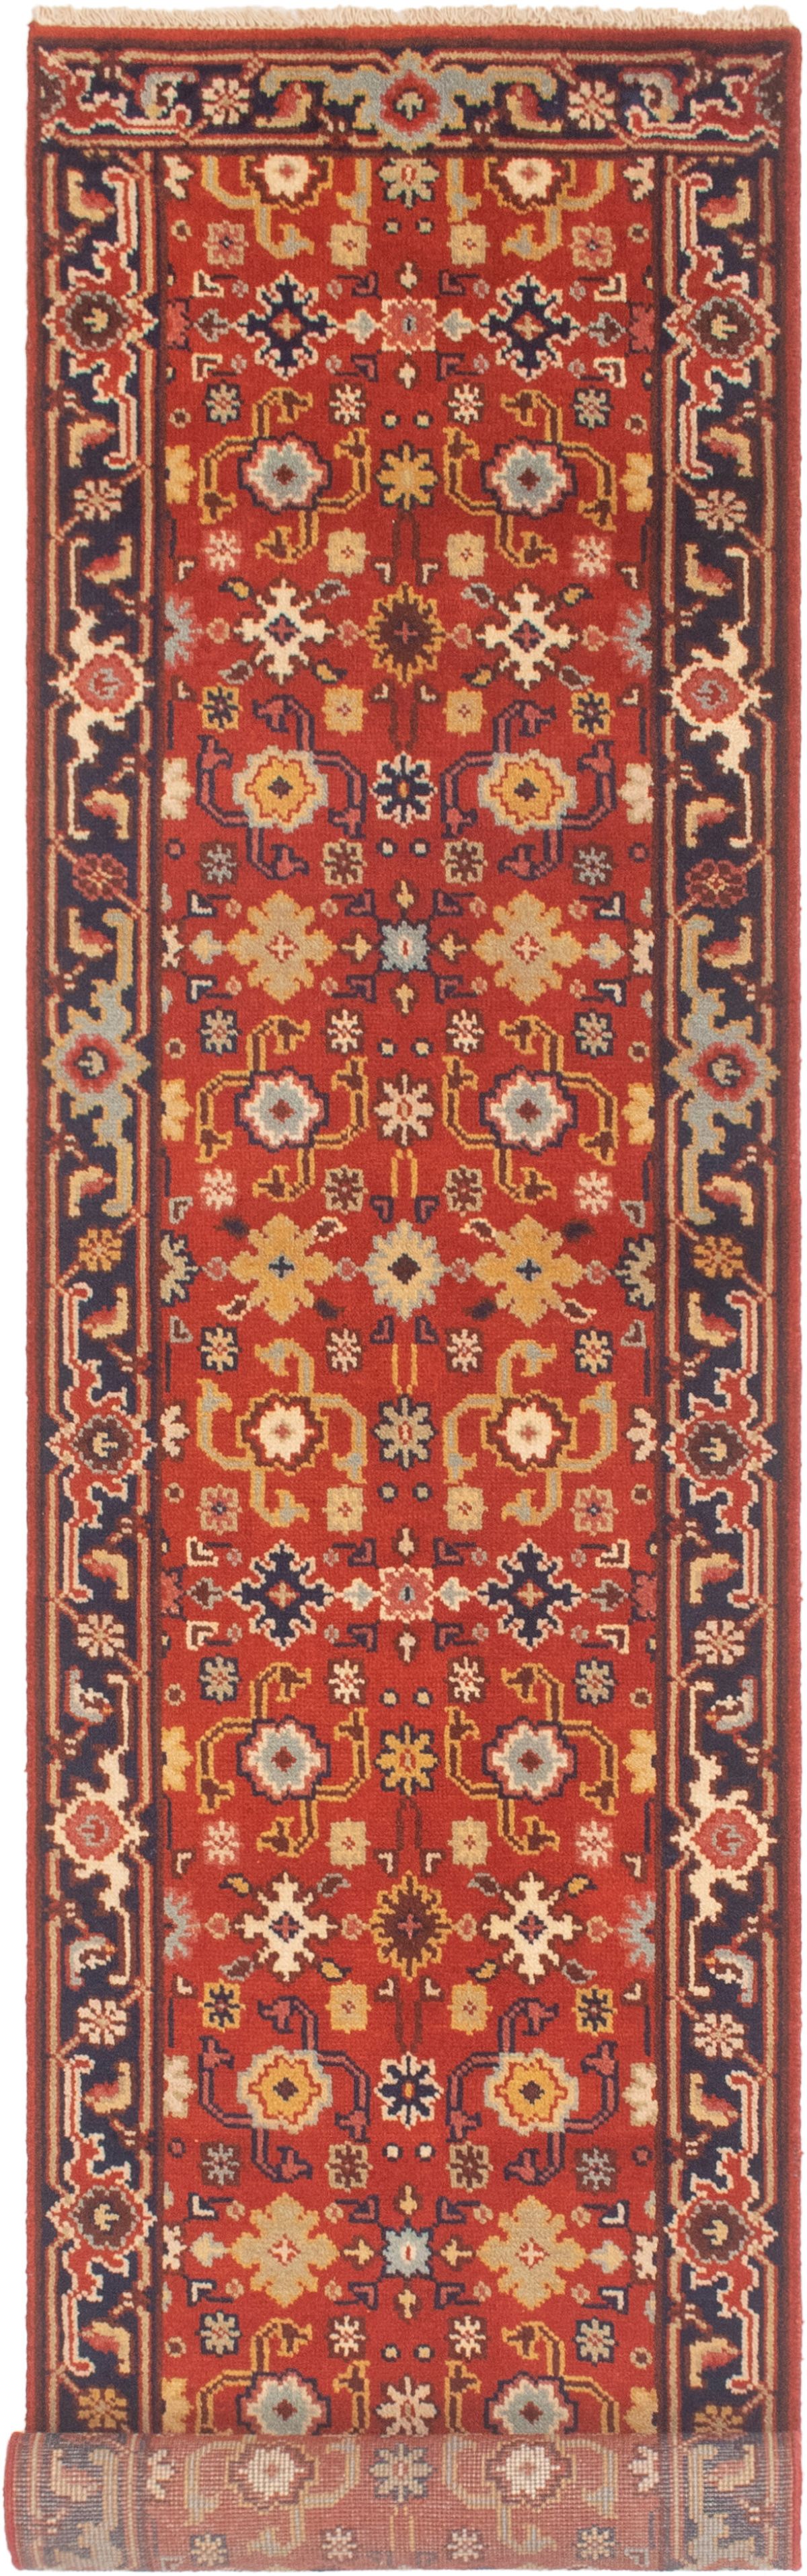 Hand-knotted Serapi Heritage Red Wool Rug 2'6" x 12'2"  Size: 2'6" x 12'2"  